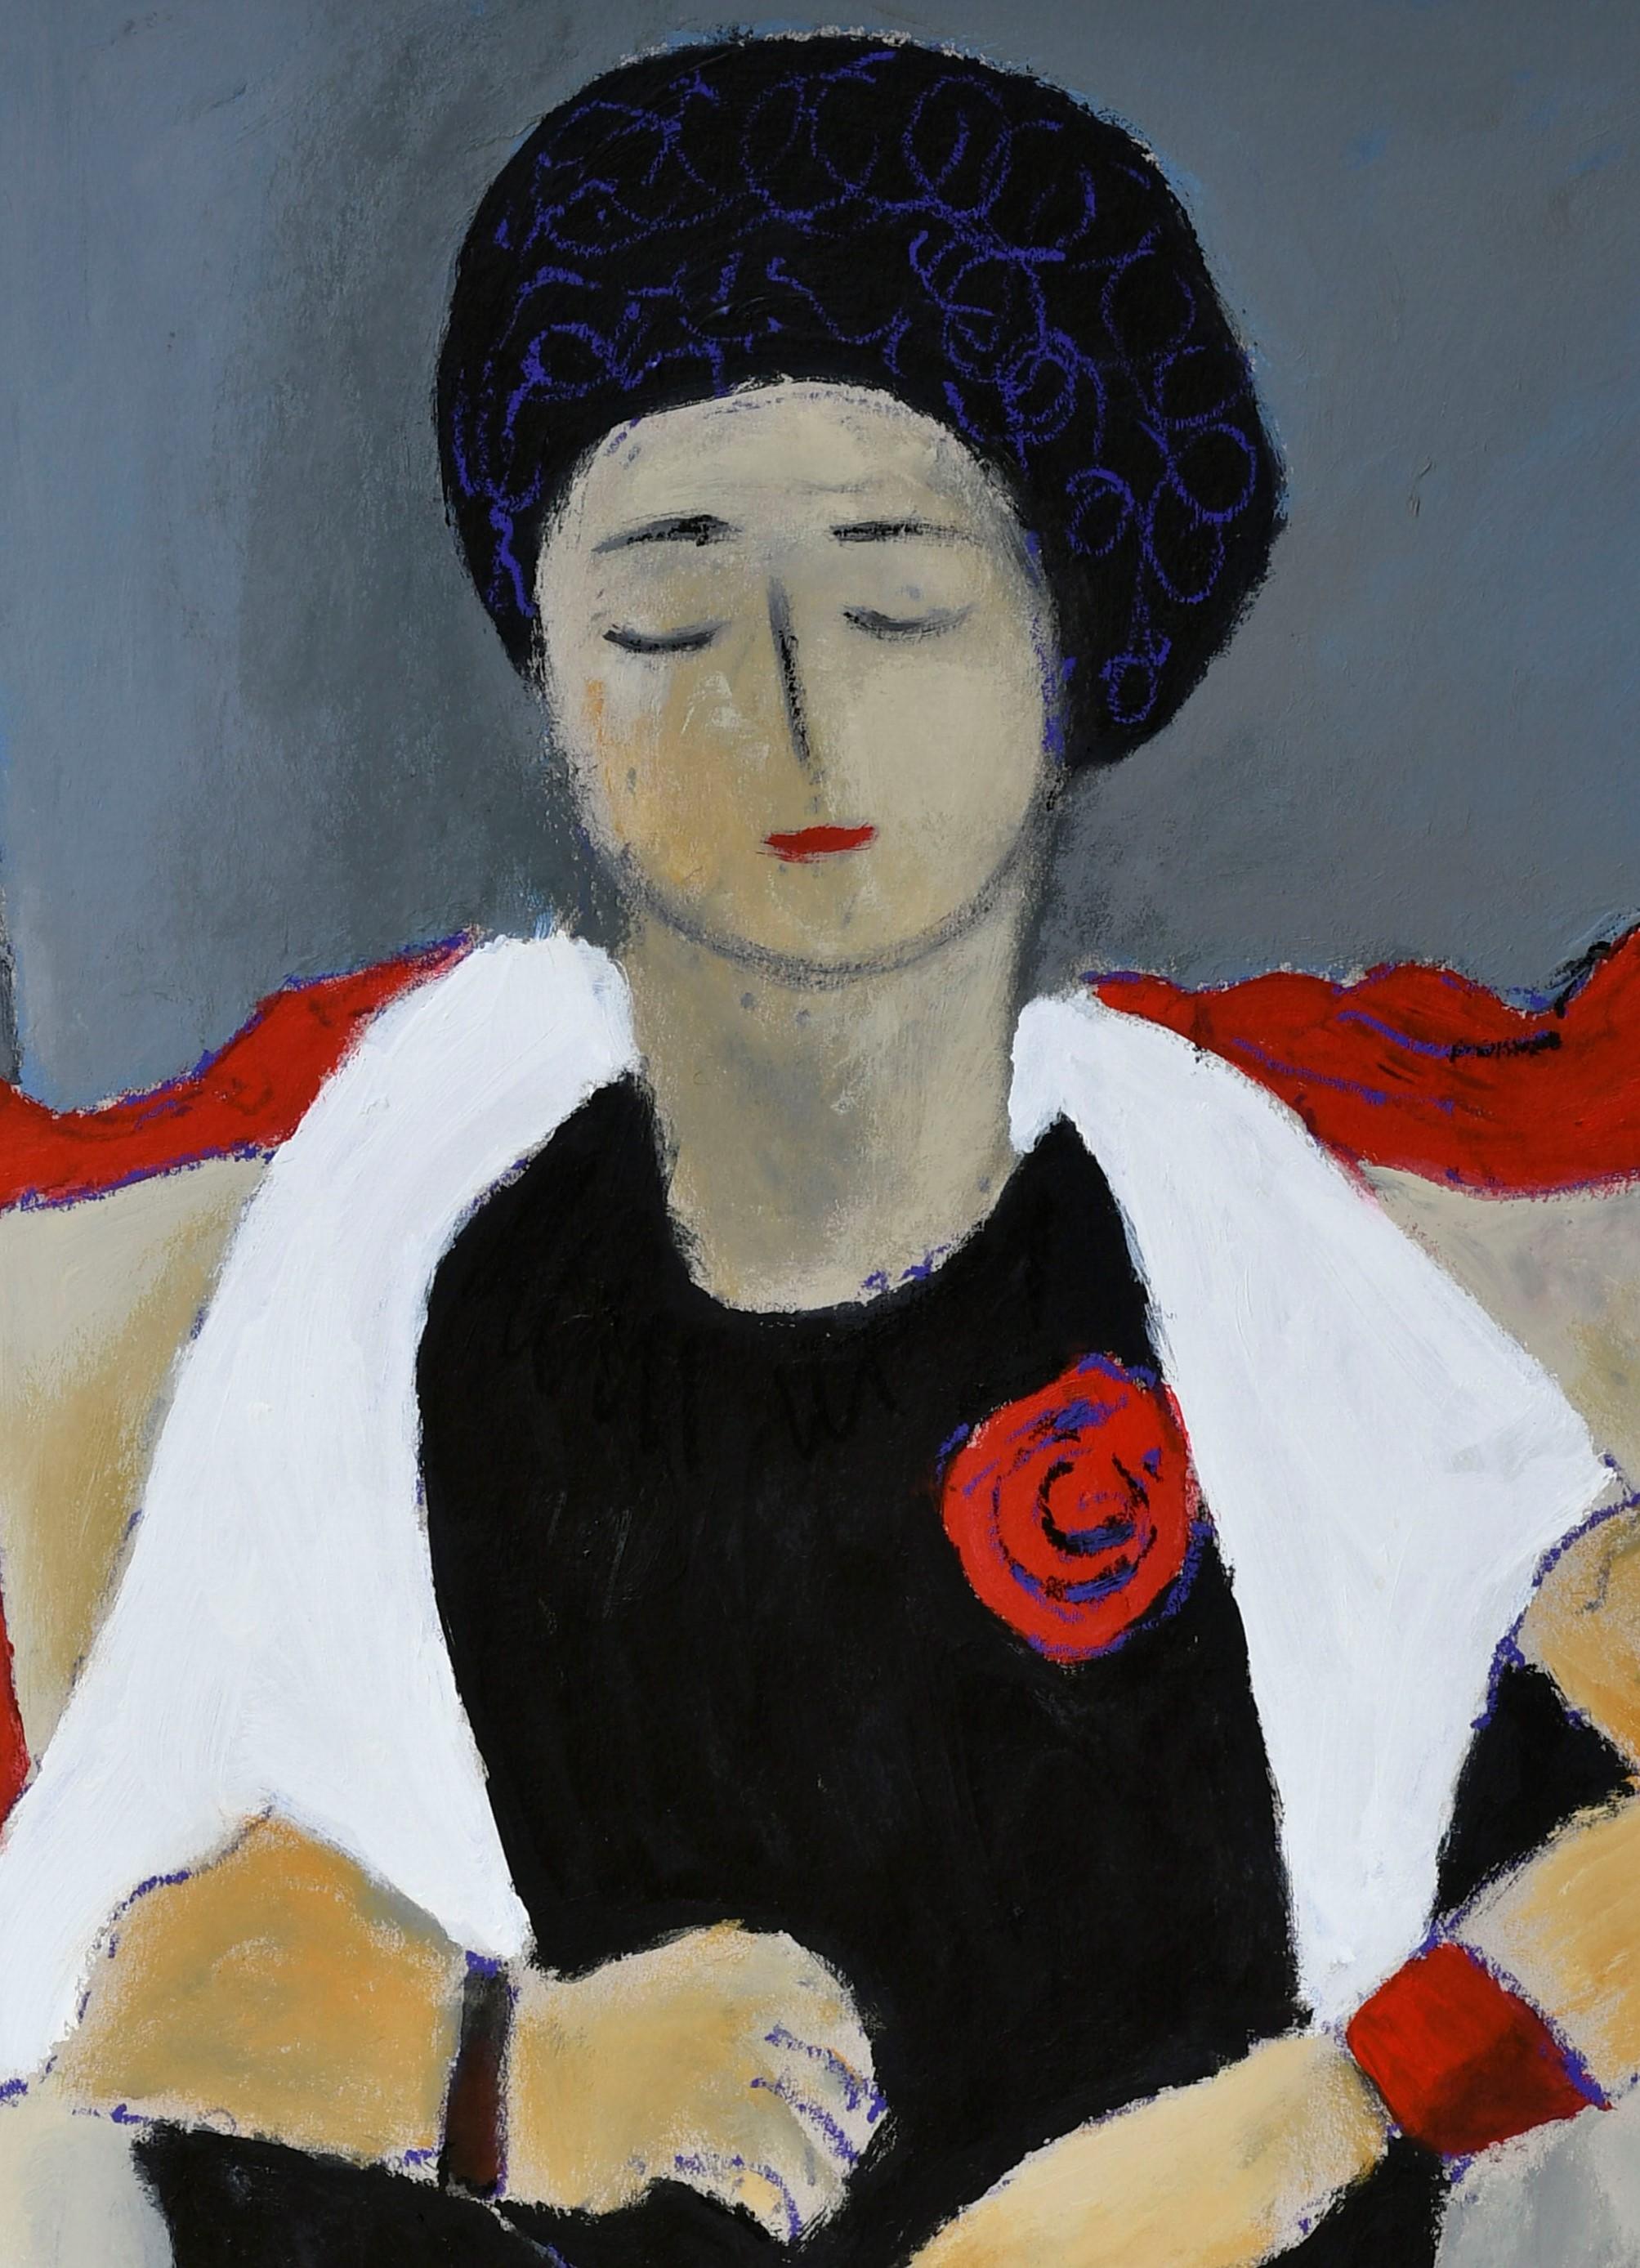 Lady with red rose - Painting by Sotos Zachariadis